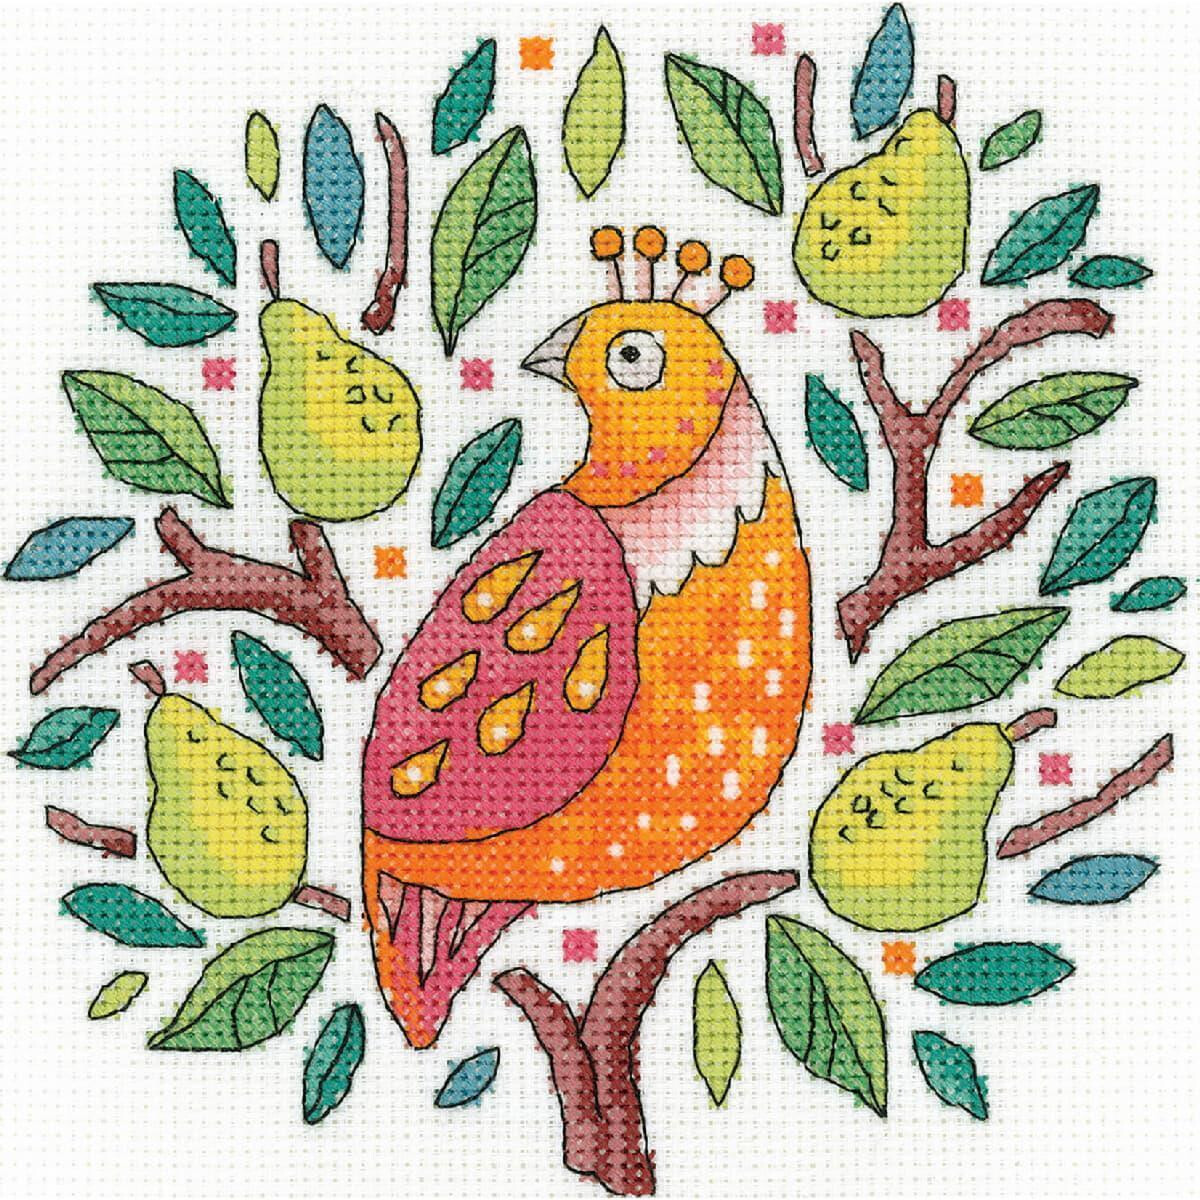 Heritage counted cross stitch kit Aida "Partridge in...